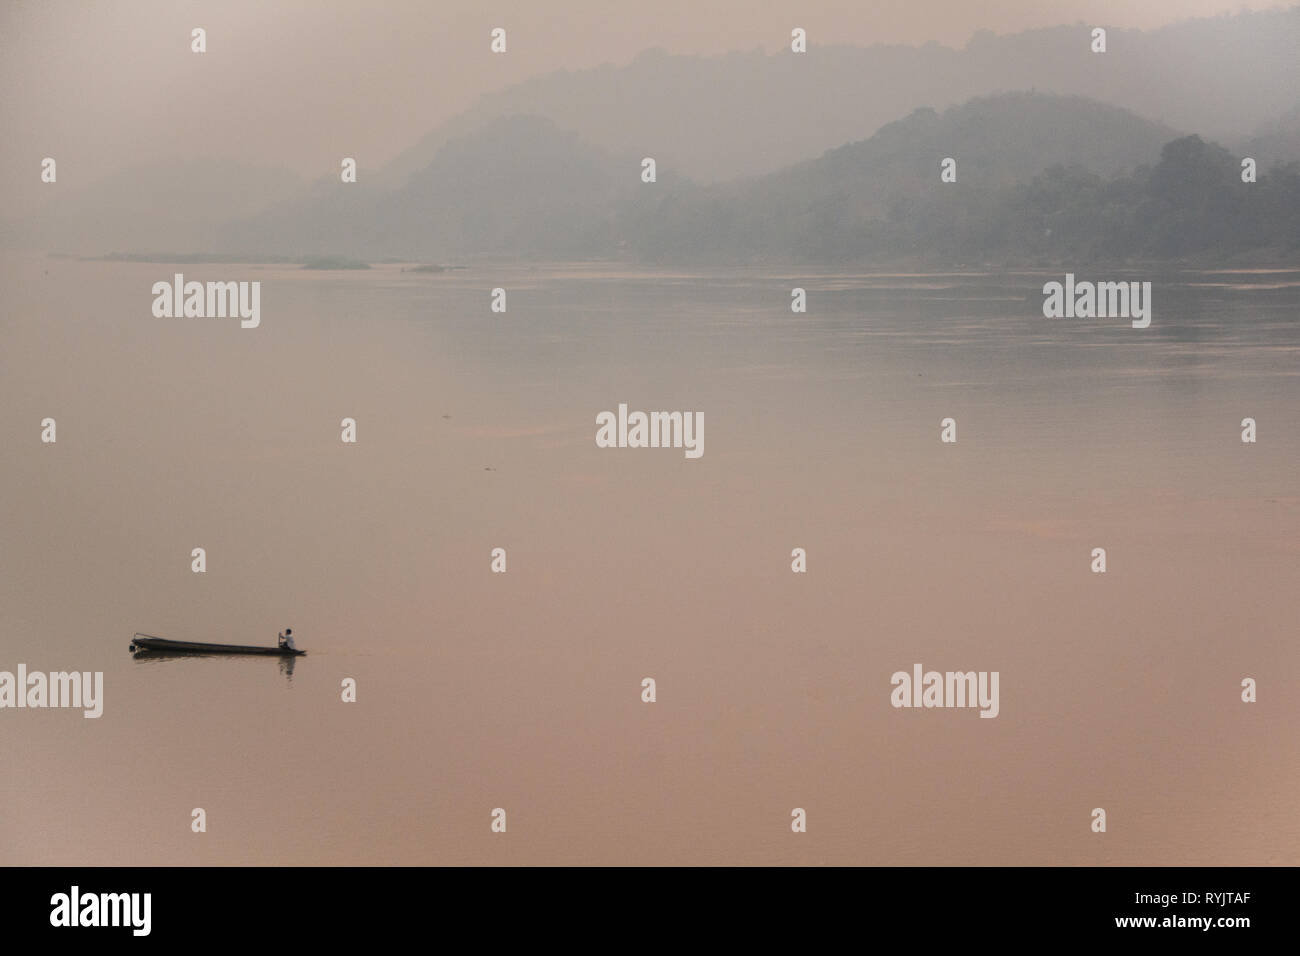 Lost in Haze - Fisherman on his boat on the Mekong during Burning Season in Laos, hazy, pastel colored air. Stock Photo